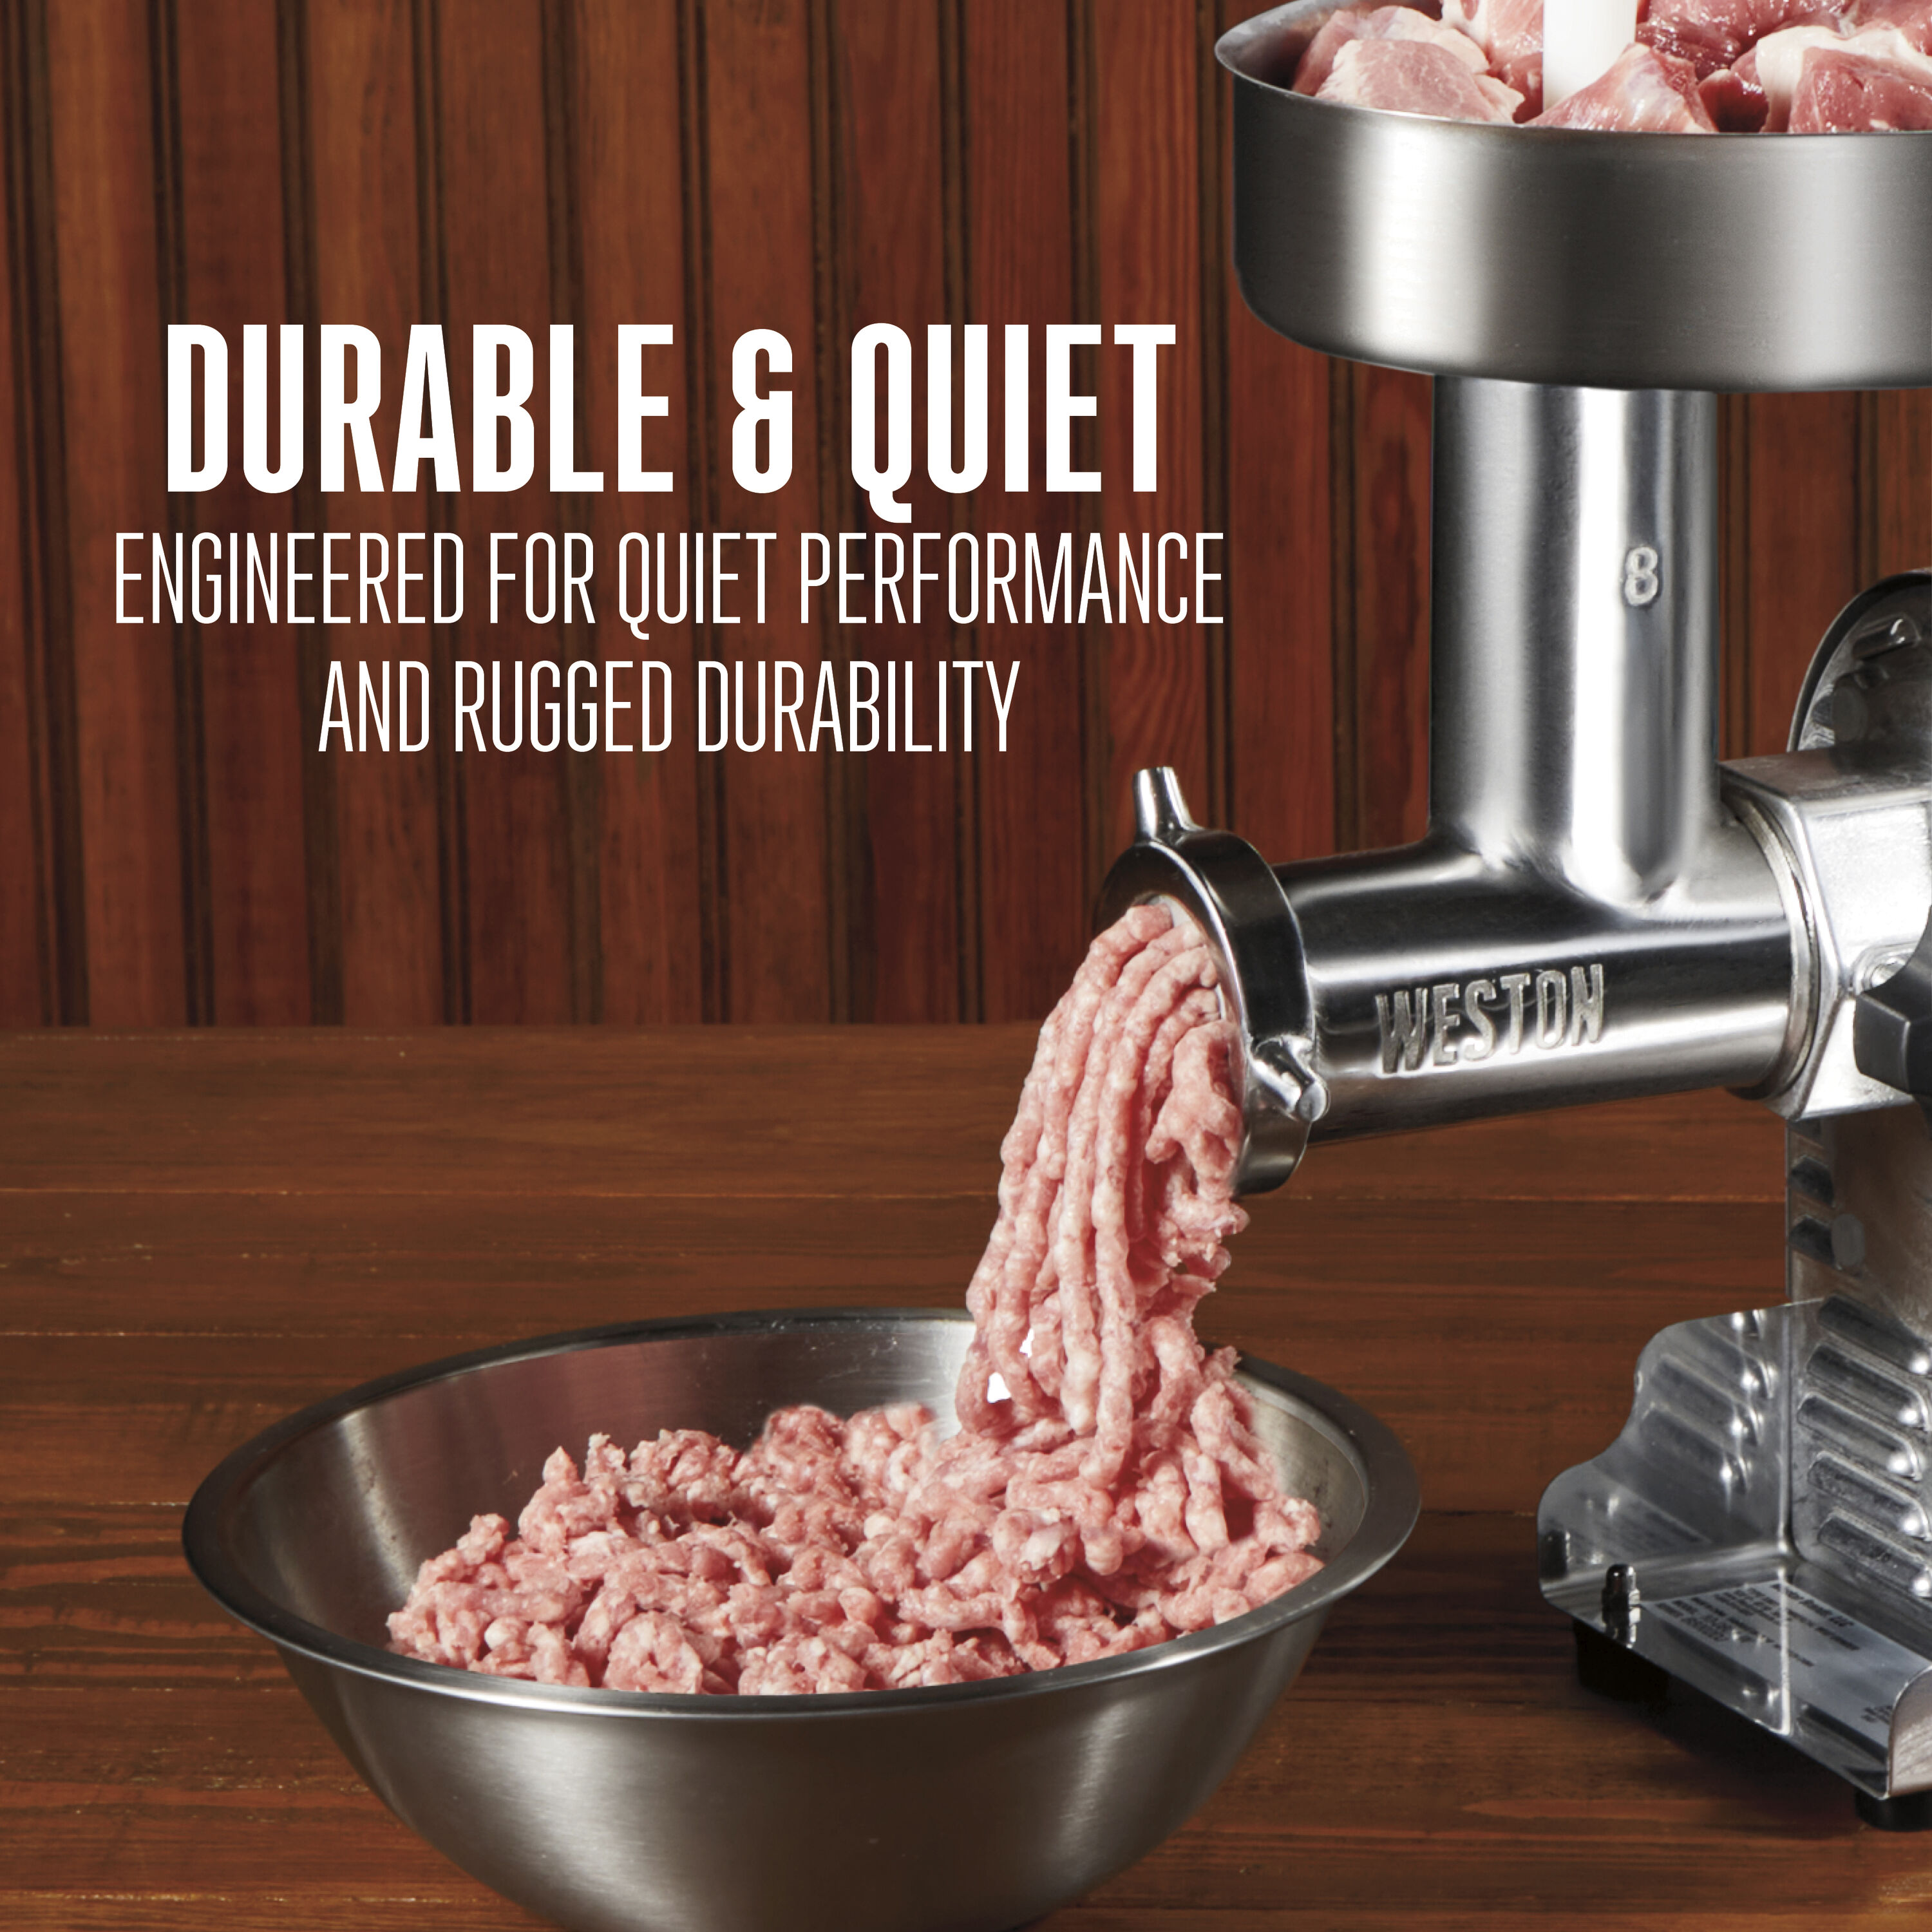 Crank it up: A meat grinder lets you choose customized blends that match  your taste for burgers, hash and beyond! – The Denver Post